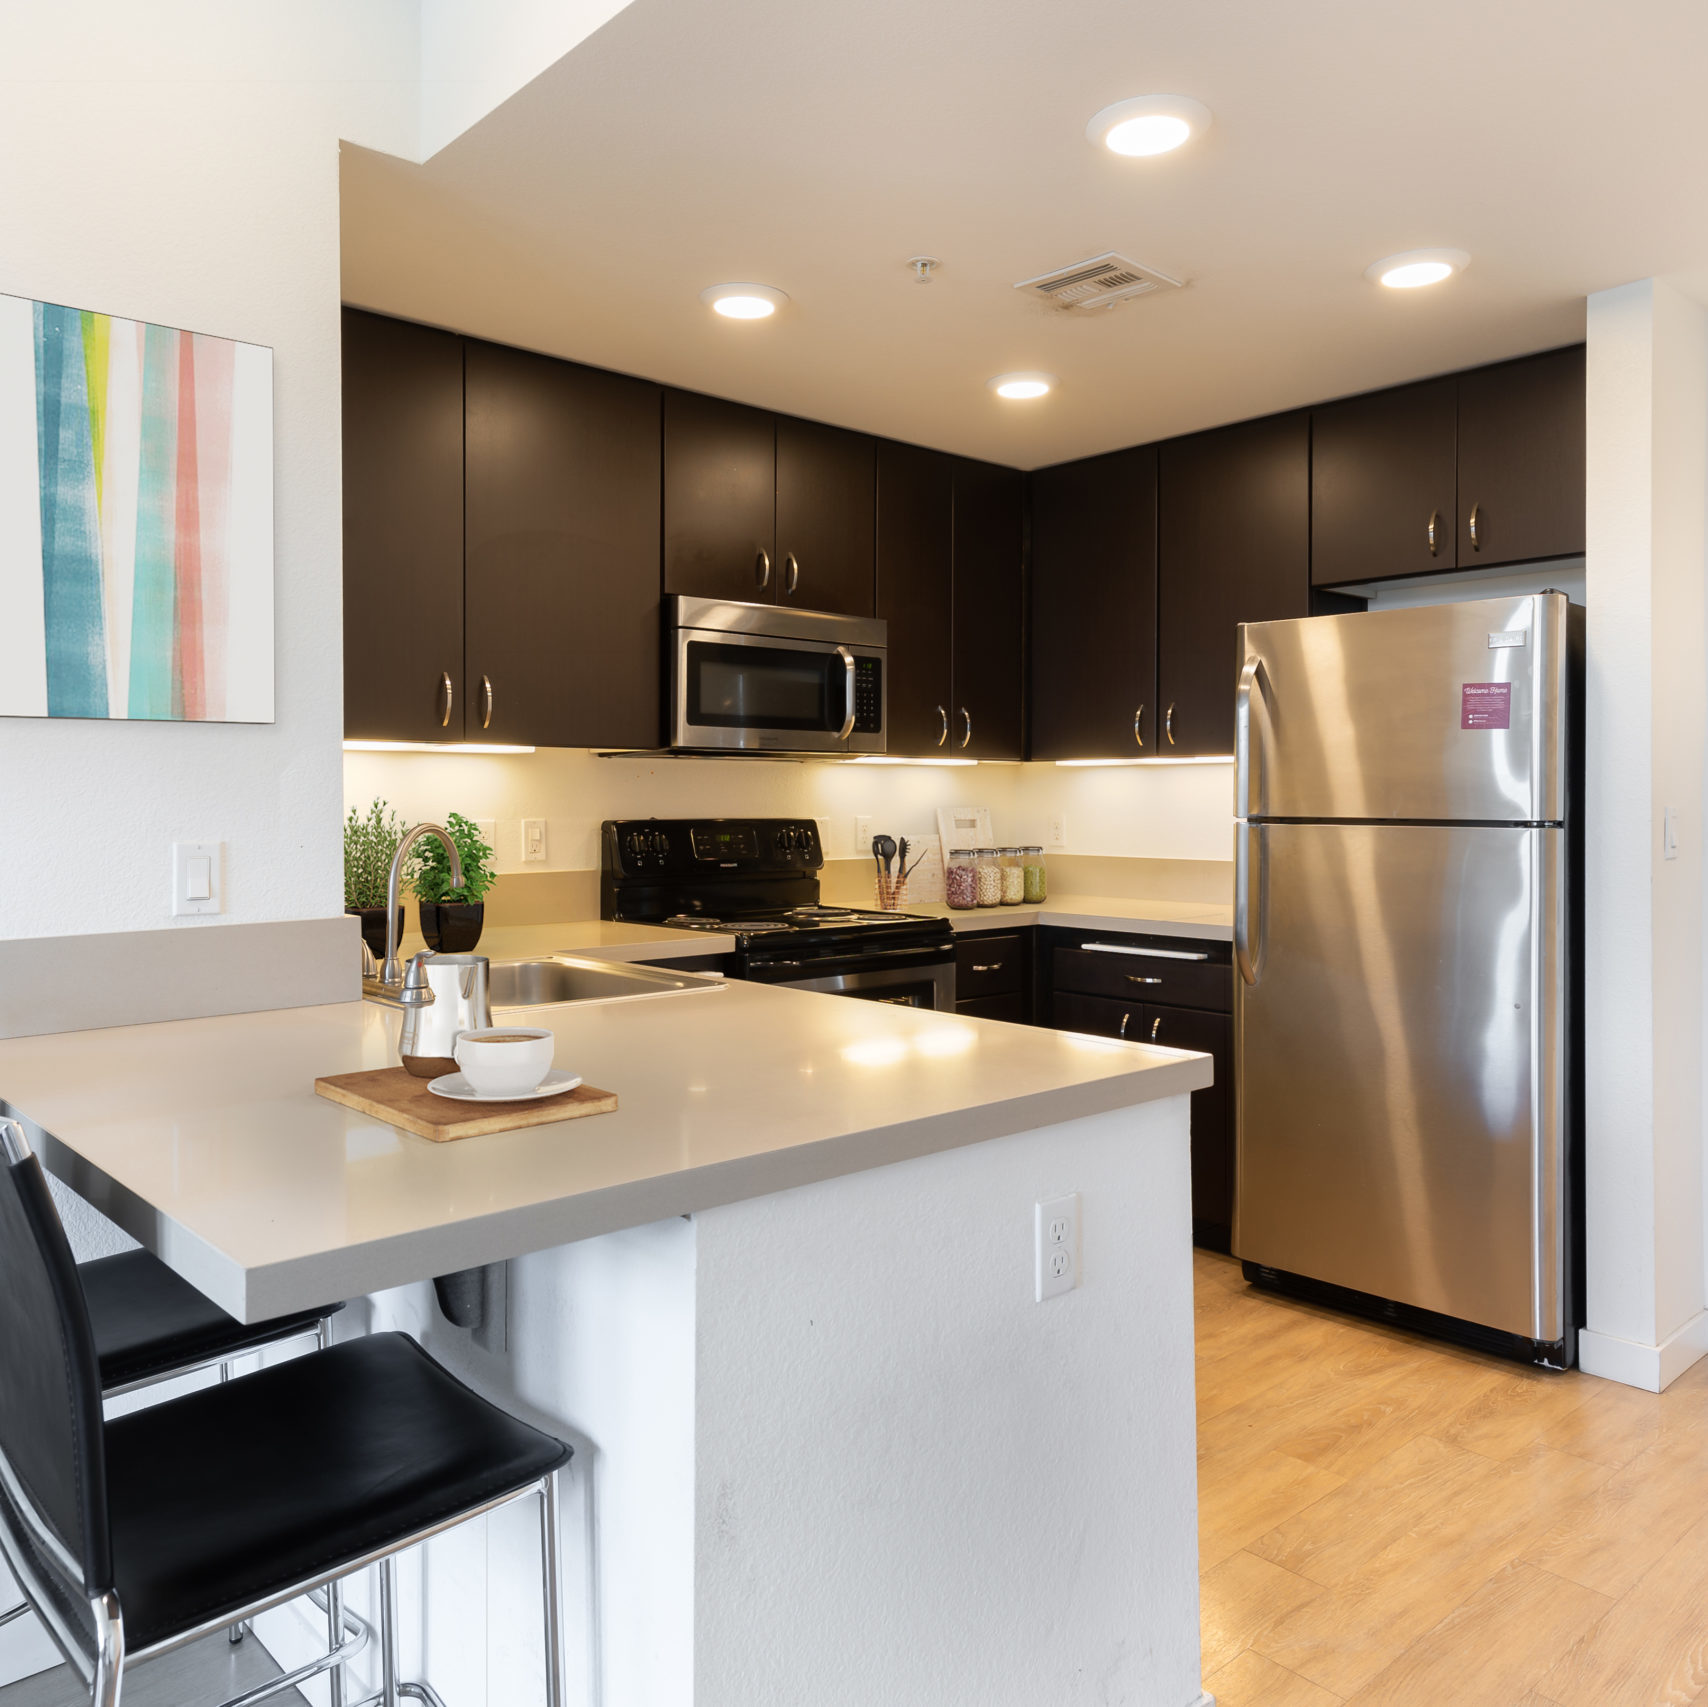 27 North - Fully equipped Kitchen